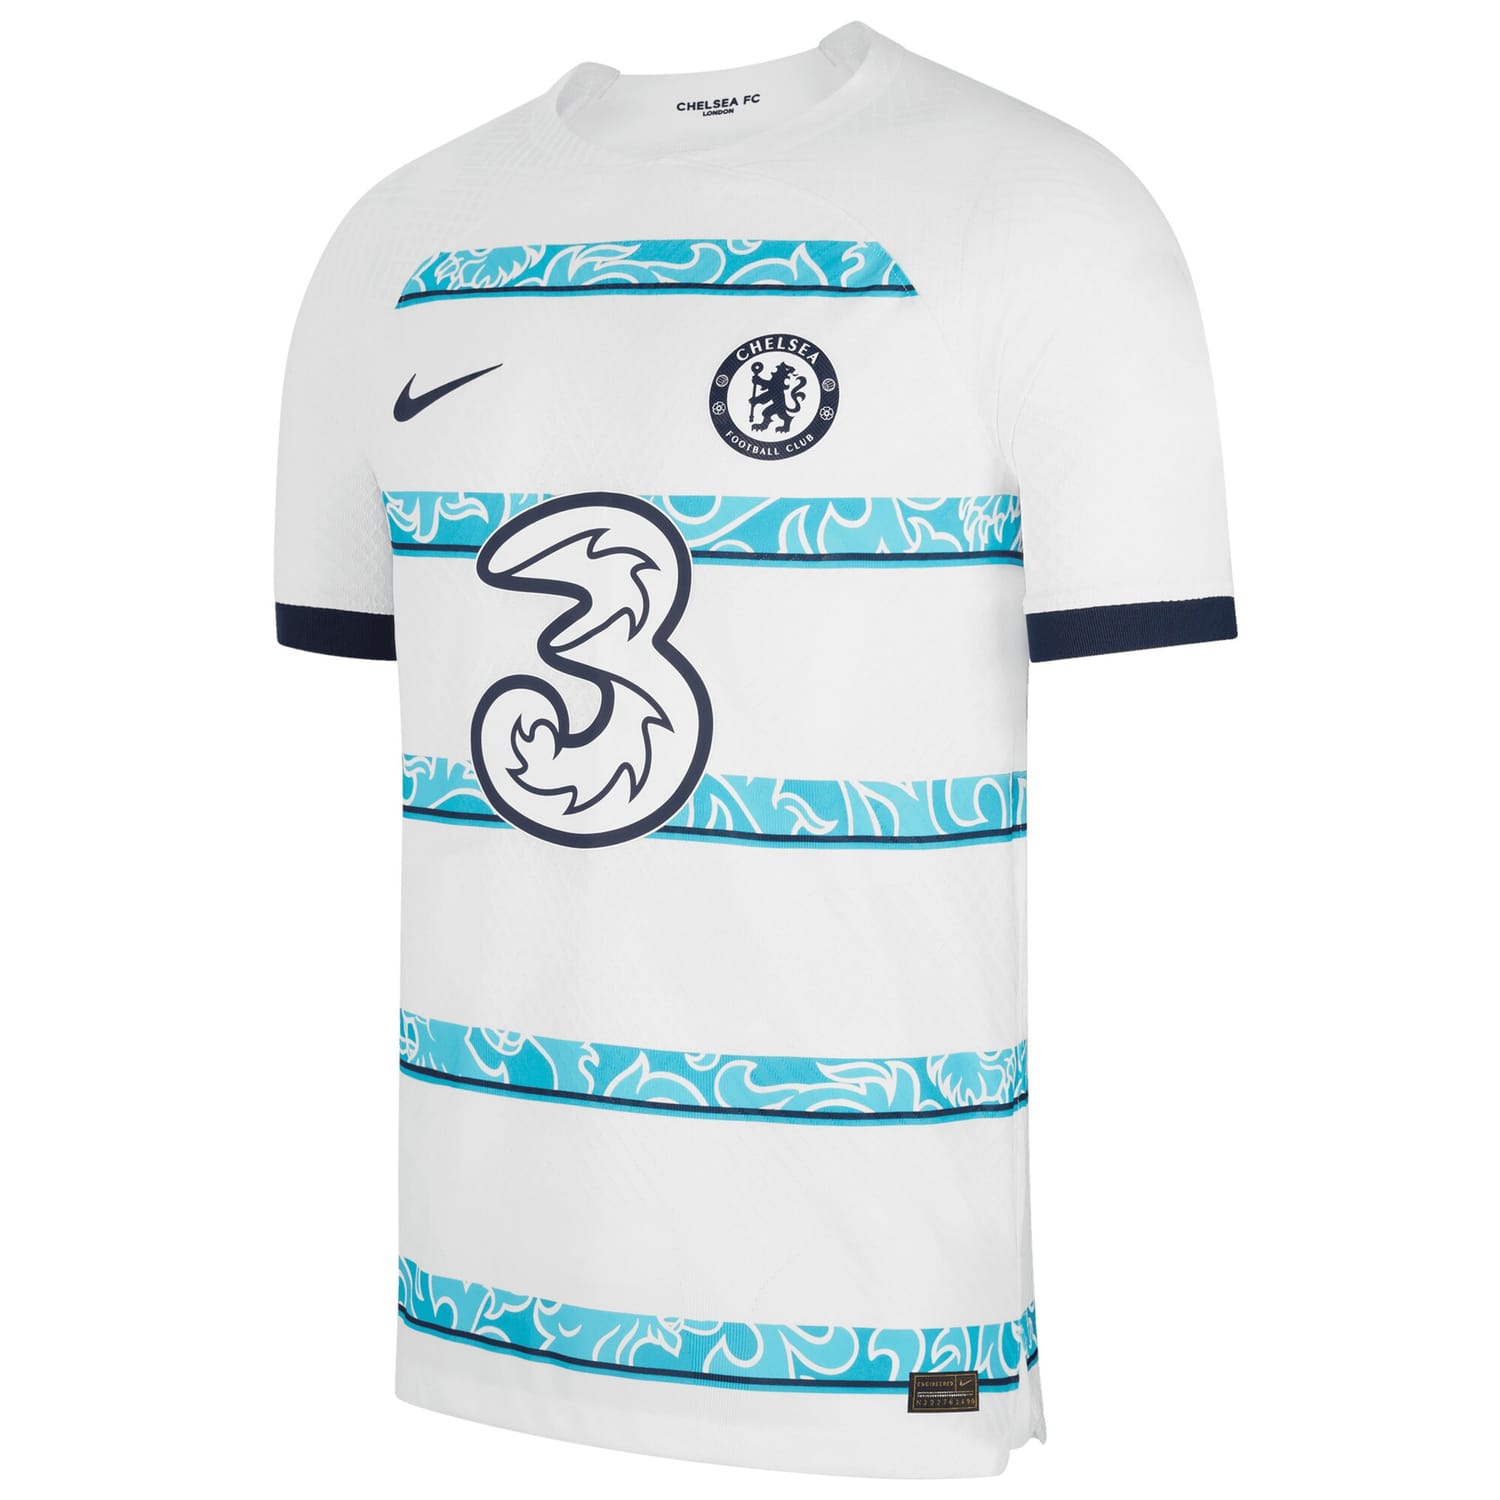 Premier League Chelsea Away Cup Authentic Jersey Shirt 2022-23 player Jessie Fleming 17 printing for Men